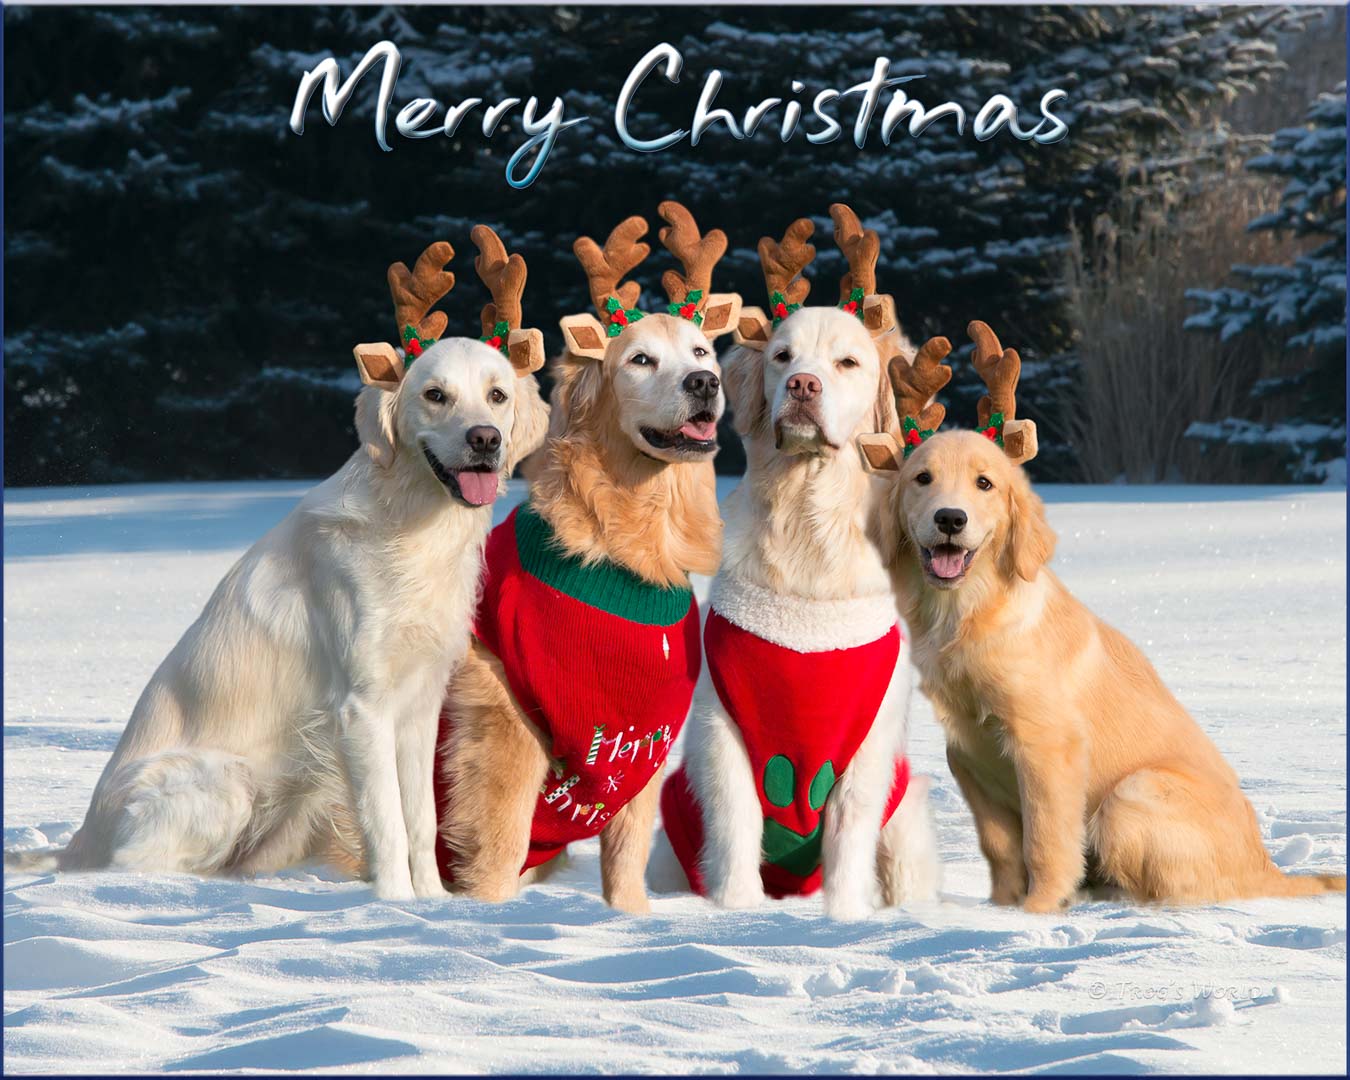 Merry Christmas from Trog's Dogs